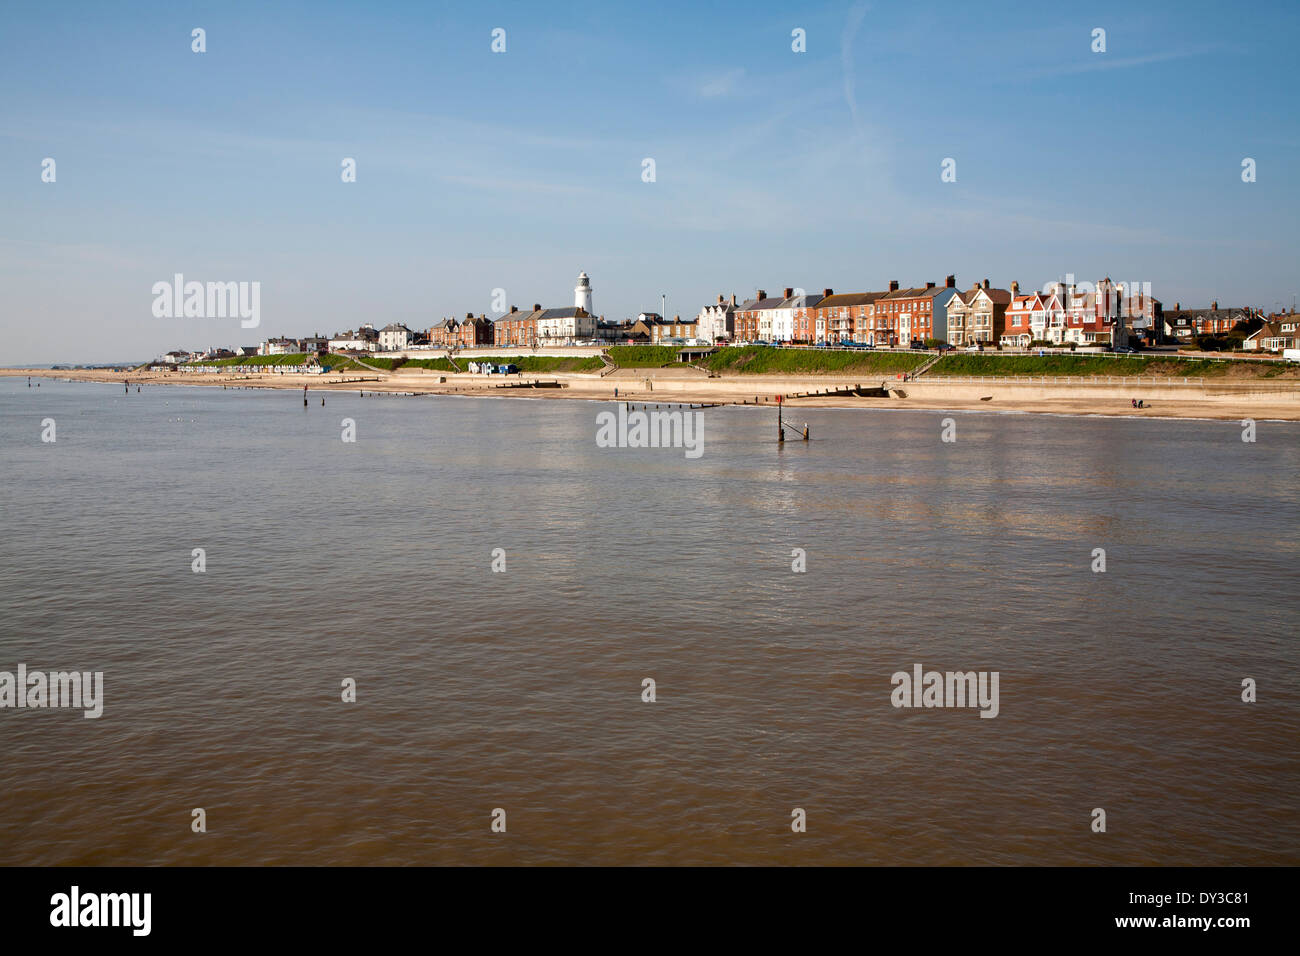 View from the pier of the historic seaside resort town of Southwold, Suffolk, England Stock Photo